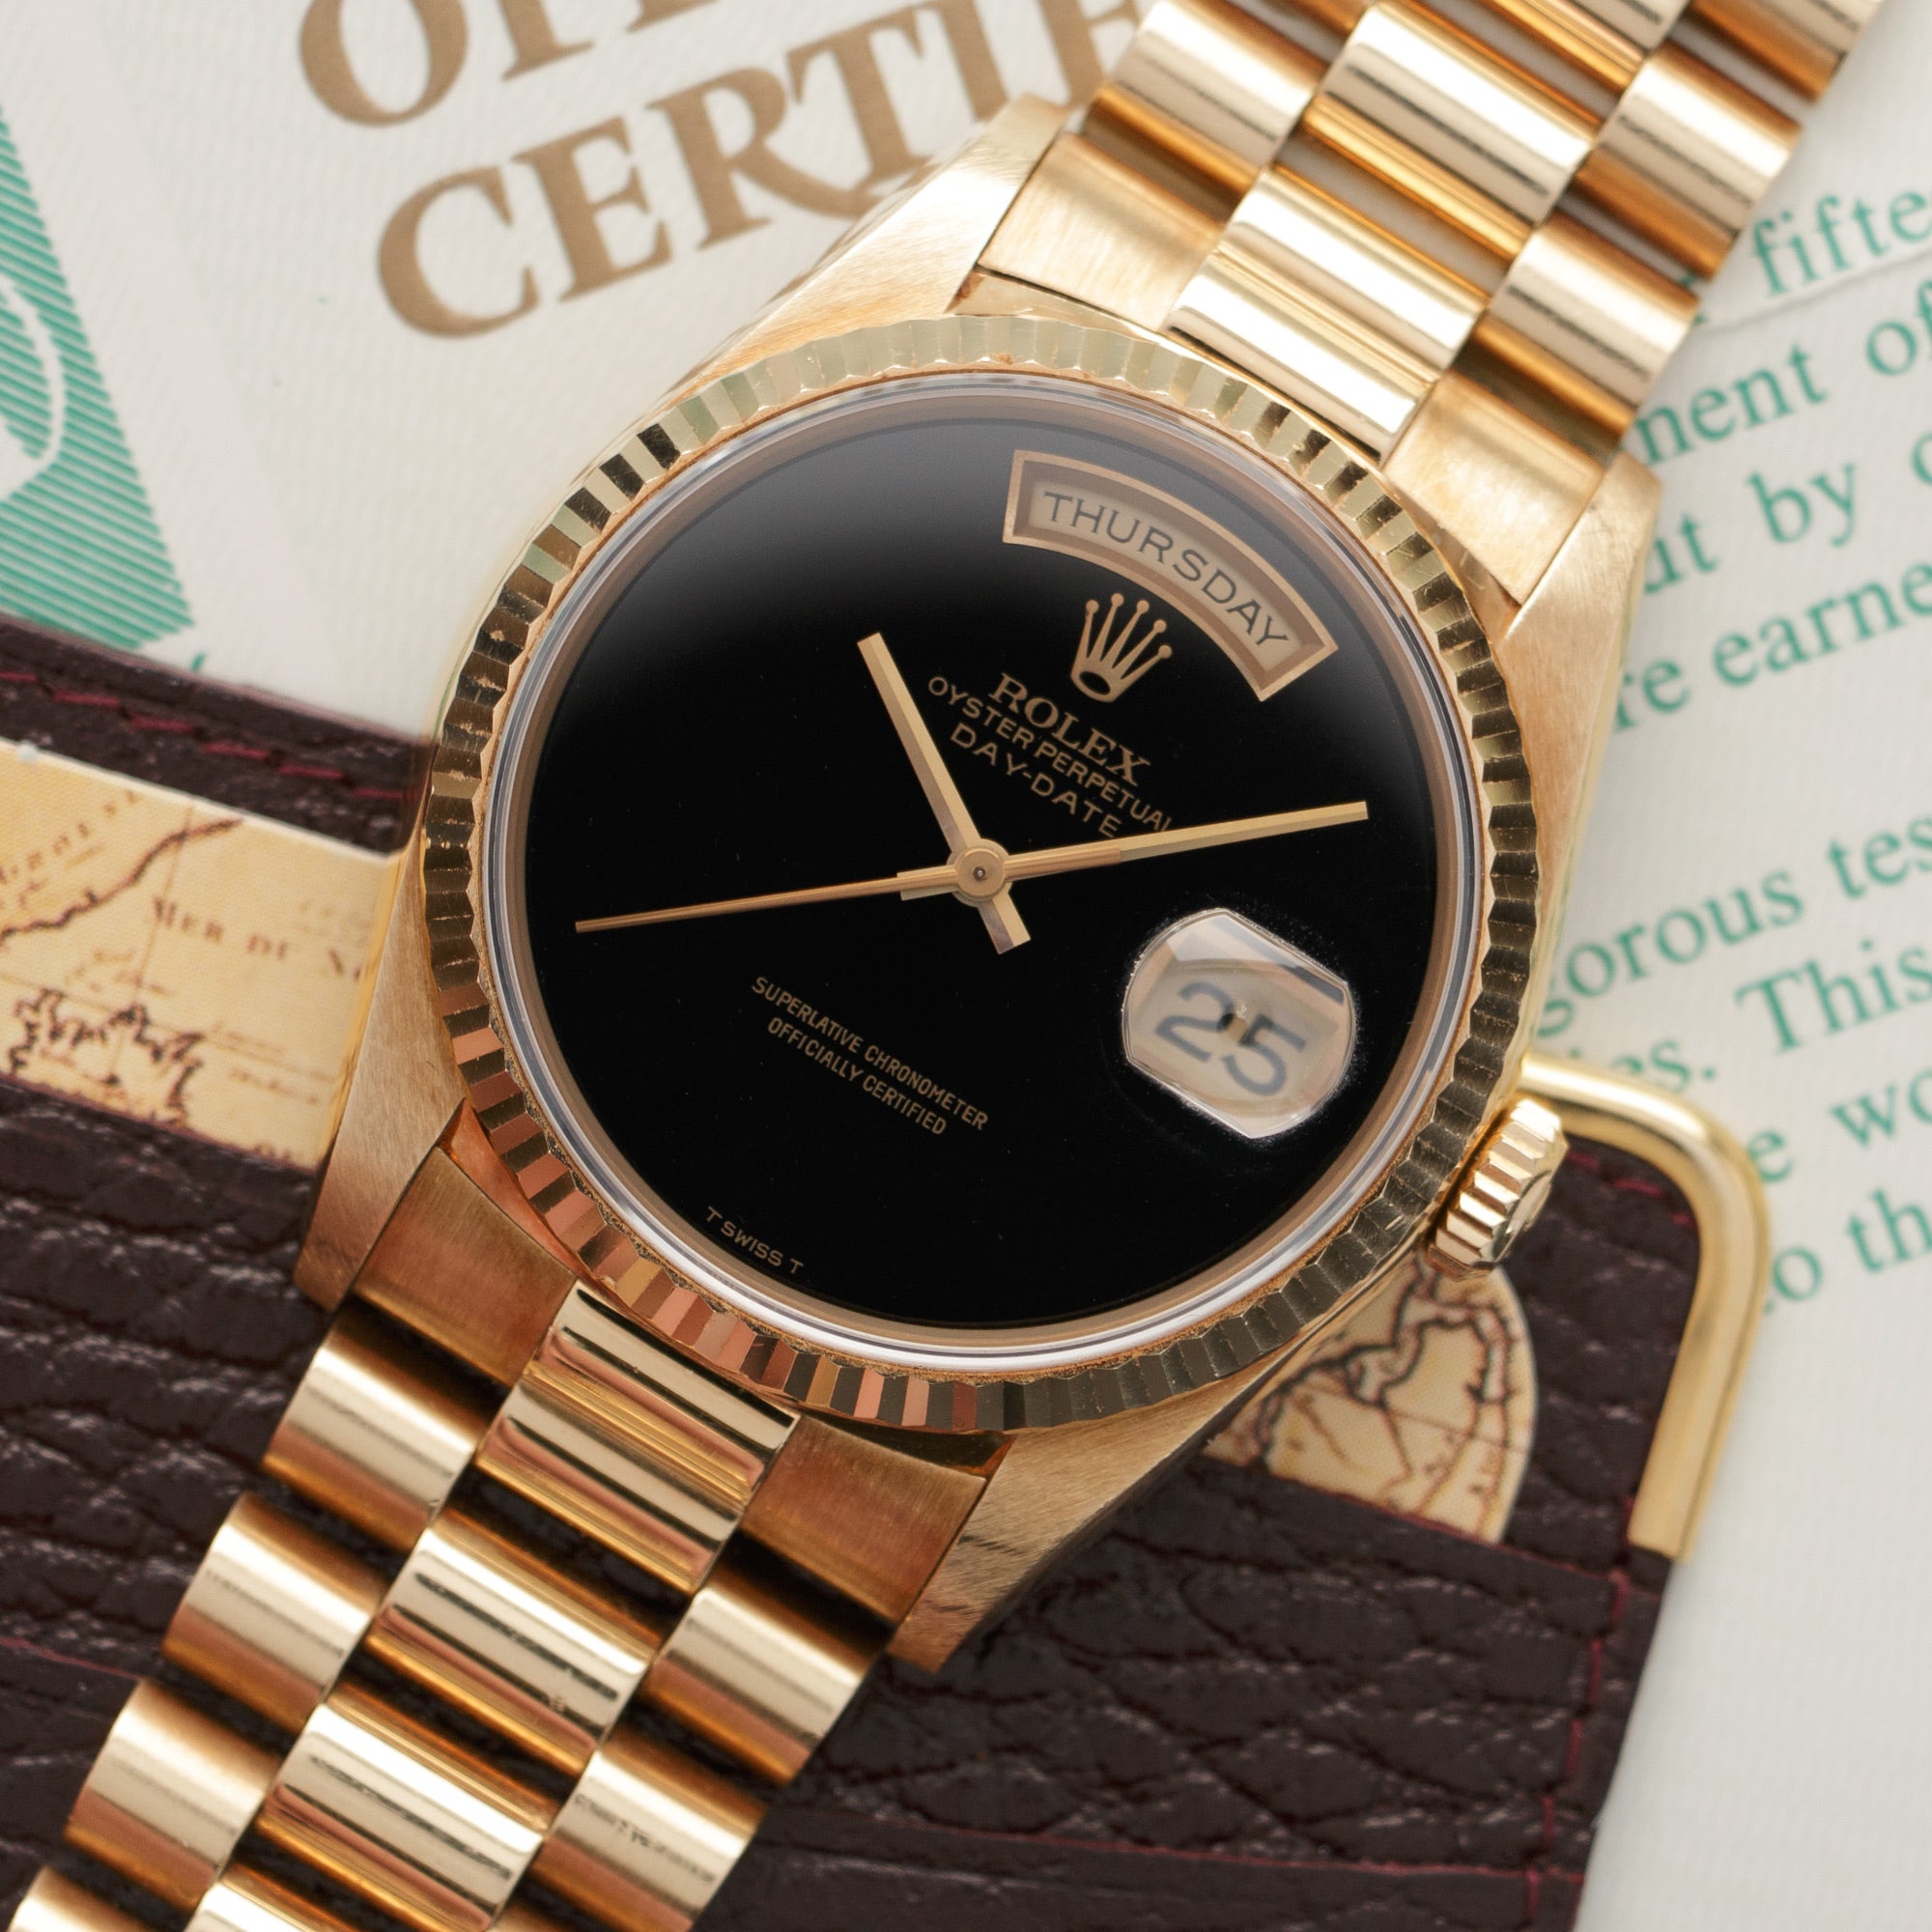 Rolex - Rolex Yellow Gold Day-Date Onyx Dial Watch, with Original Box and Papers - The Keystone Watches